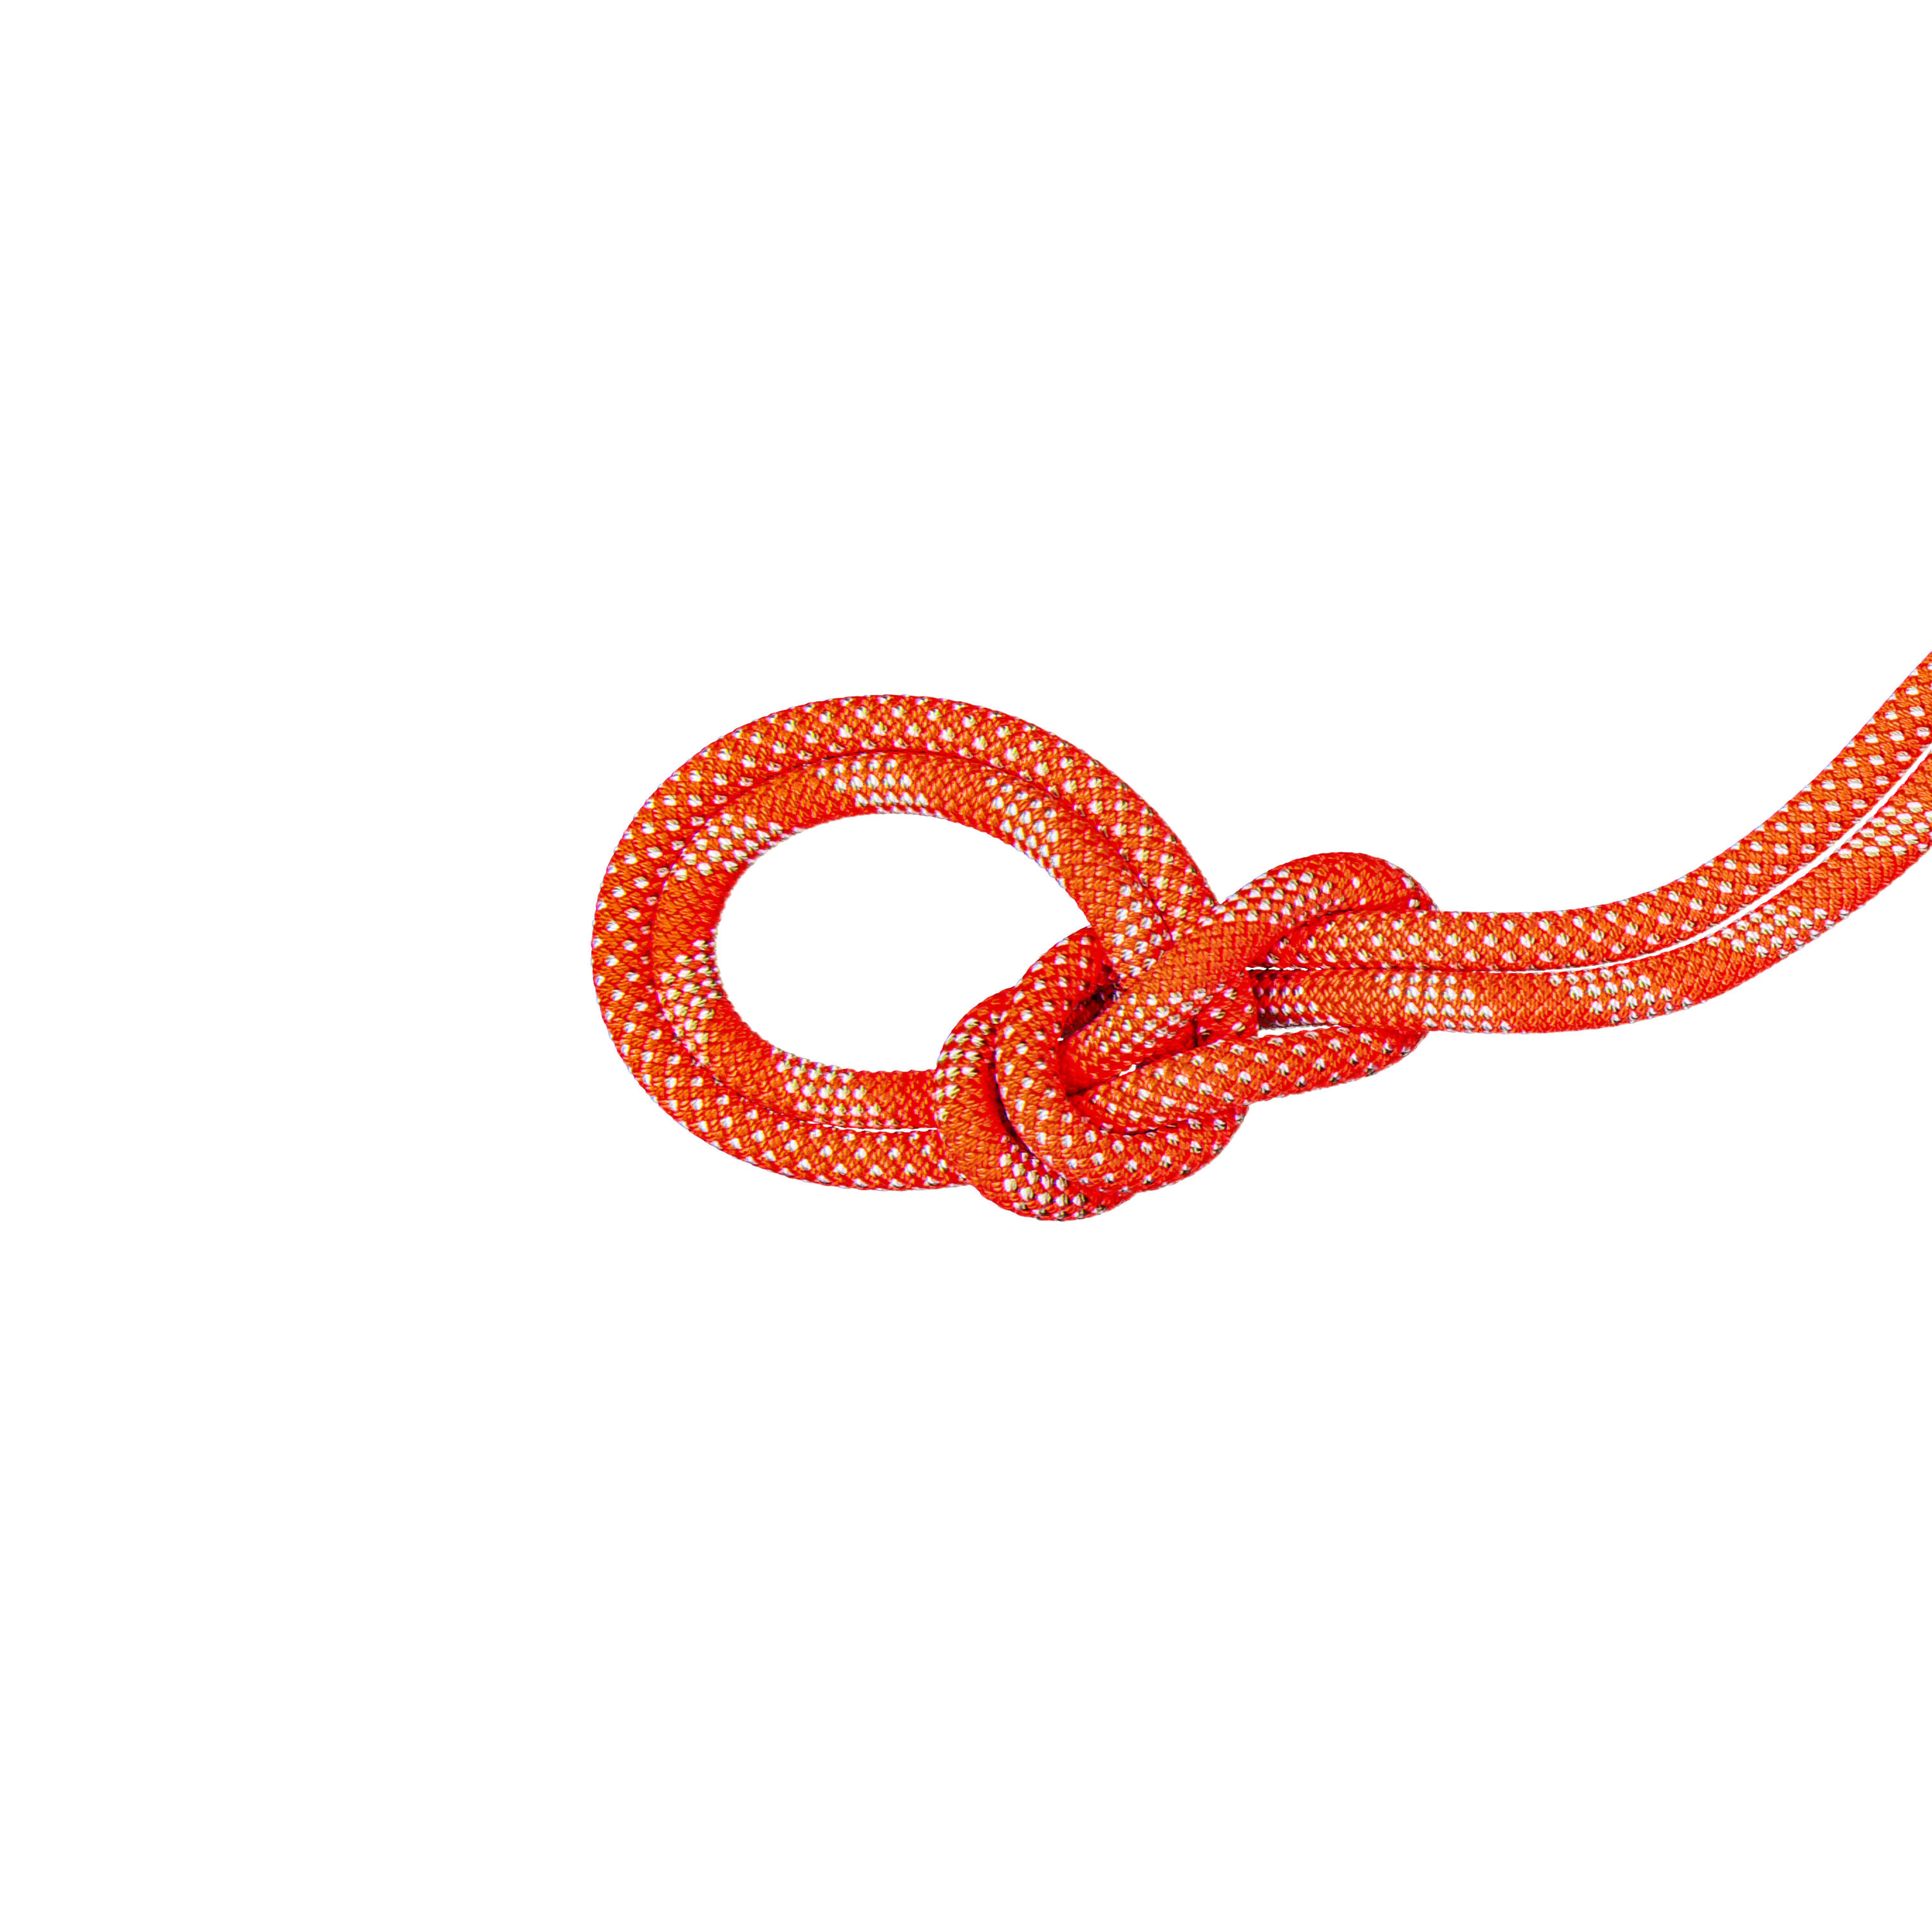 Crag Classic Duodess Single Rope 9.8 mm x 70m 1/4